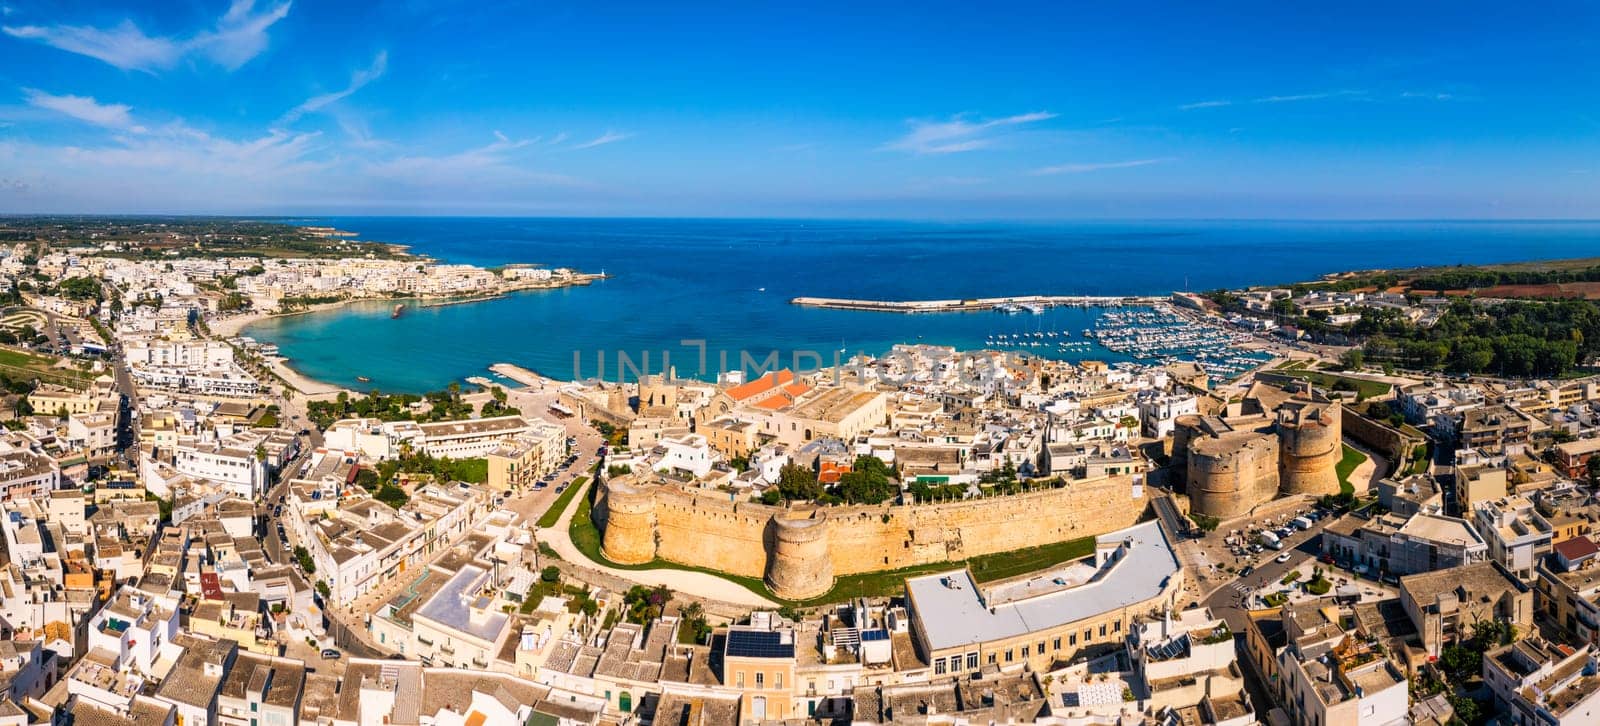 Aerial view of Otranto town on the Salento Peninsula in the south of Italy, Easternmost city in Italy (Apulia) on the coast of the Adriatic Sea. View of Otranto town, Puglia region, Italy. by DaLiu